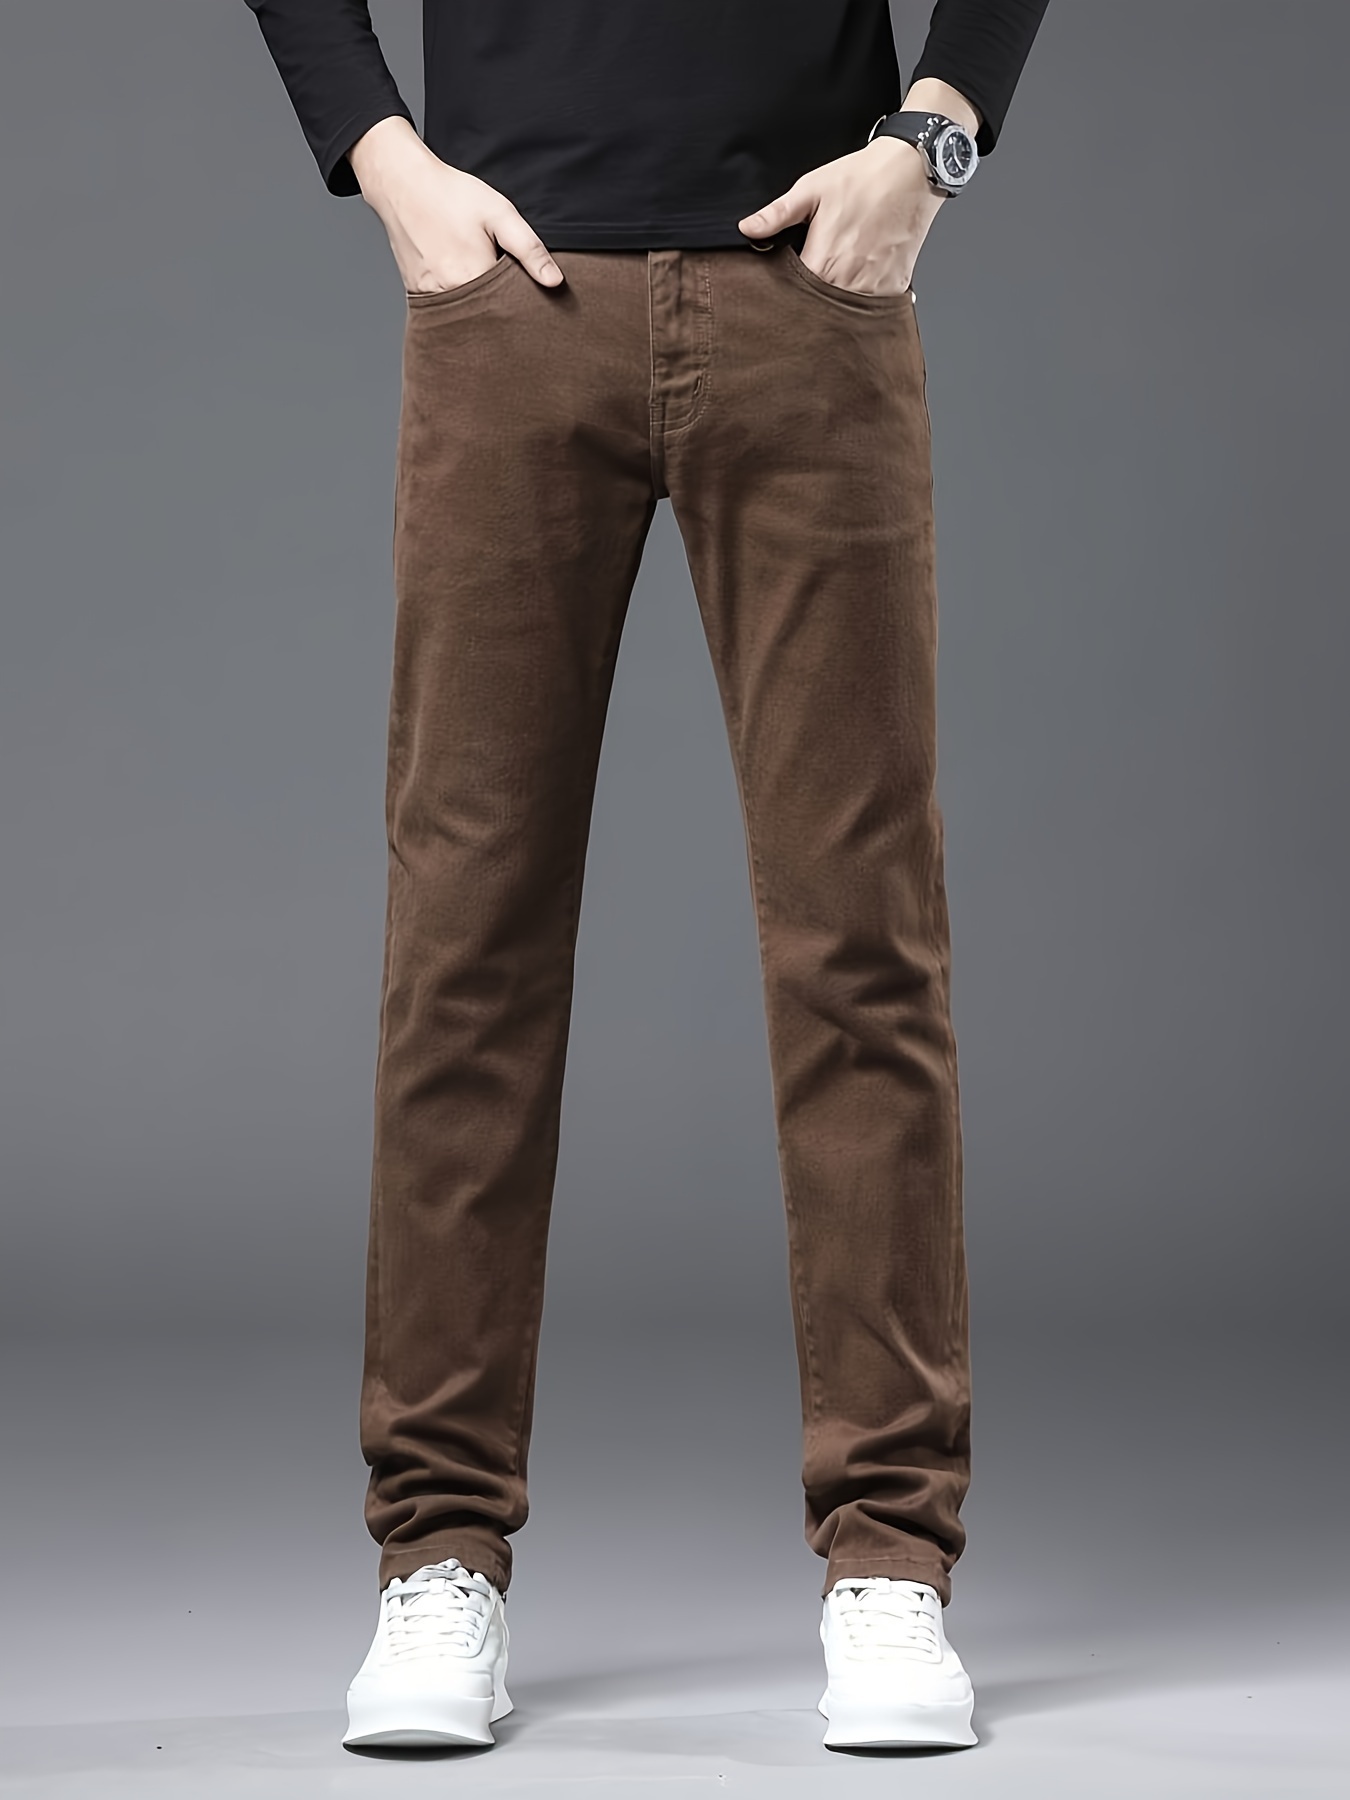 Brown Corduroy Jeans Outfits For Men (37 ideas & outfits)